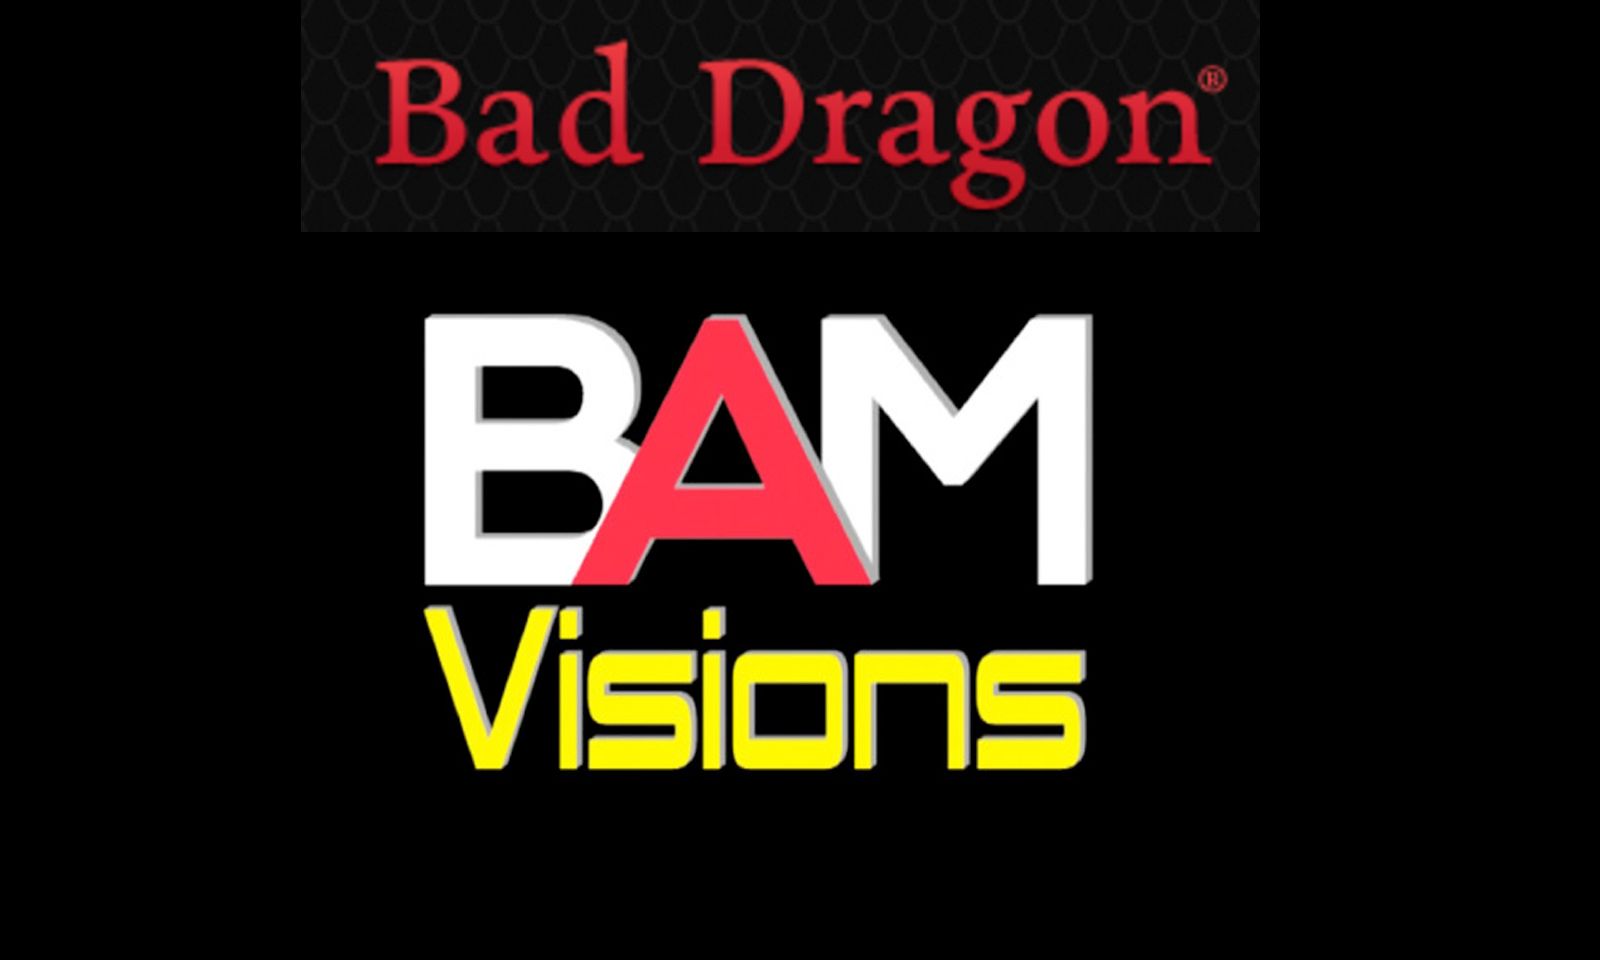 BAM Visions Teams With Bad Dragon for ‘Fantasy Anal Play’